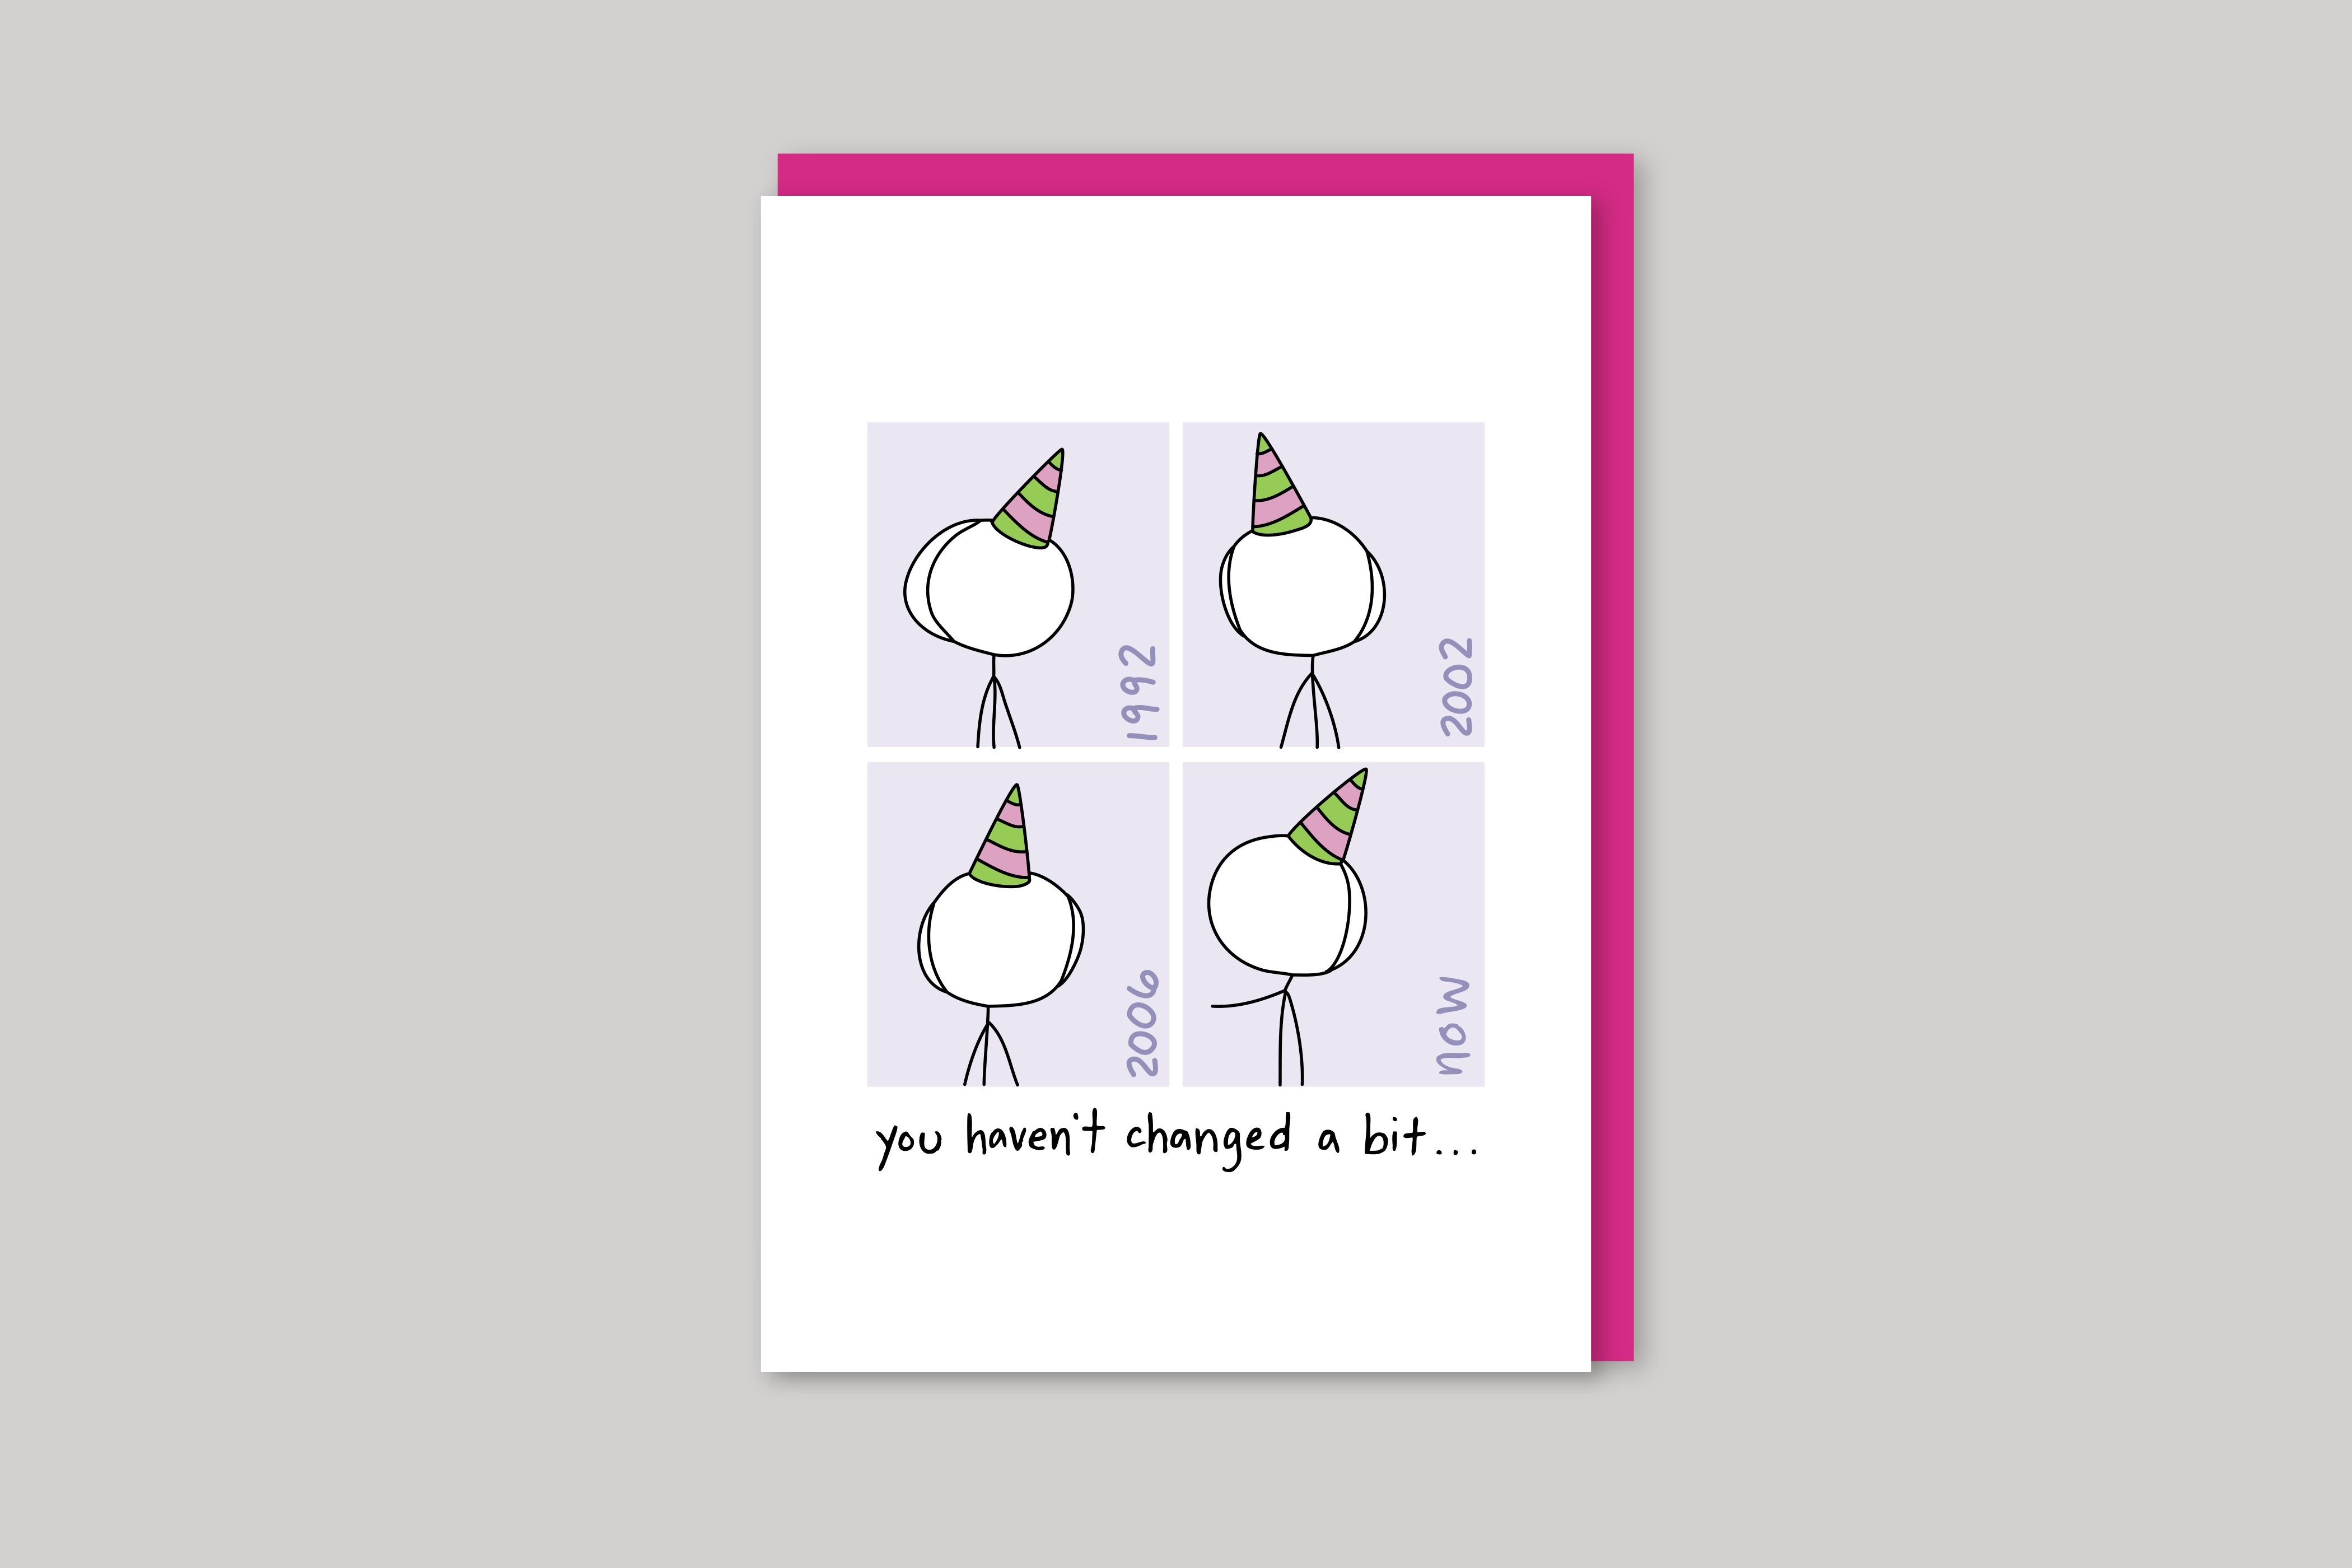 You Haven't Changed a Bit humorous illustration from Mean Cards range of greeting cards by Icon, back page.